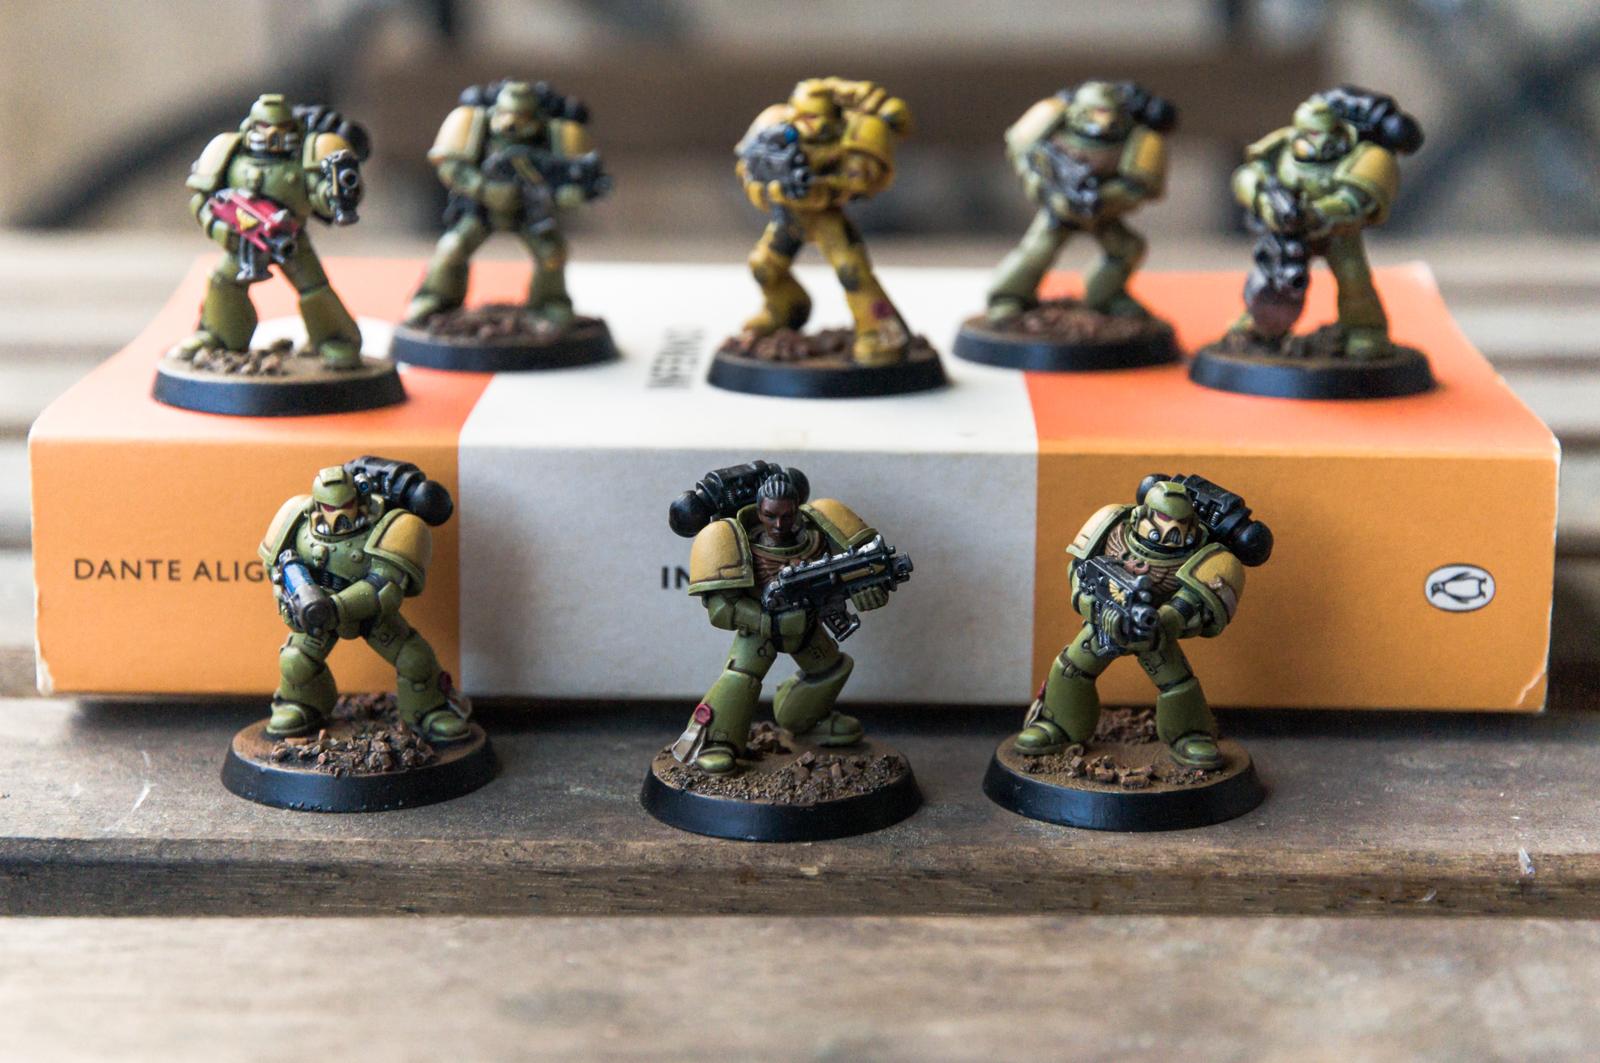 Camouflage, Heavy Bolter, Mantis Warriors, Plasma Guns, Space Marines, Tactical Squad, Tranquillity, Veteran Sergeant